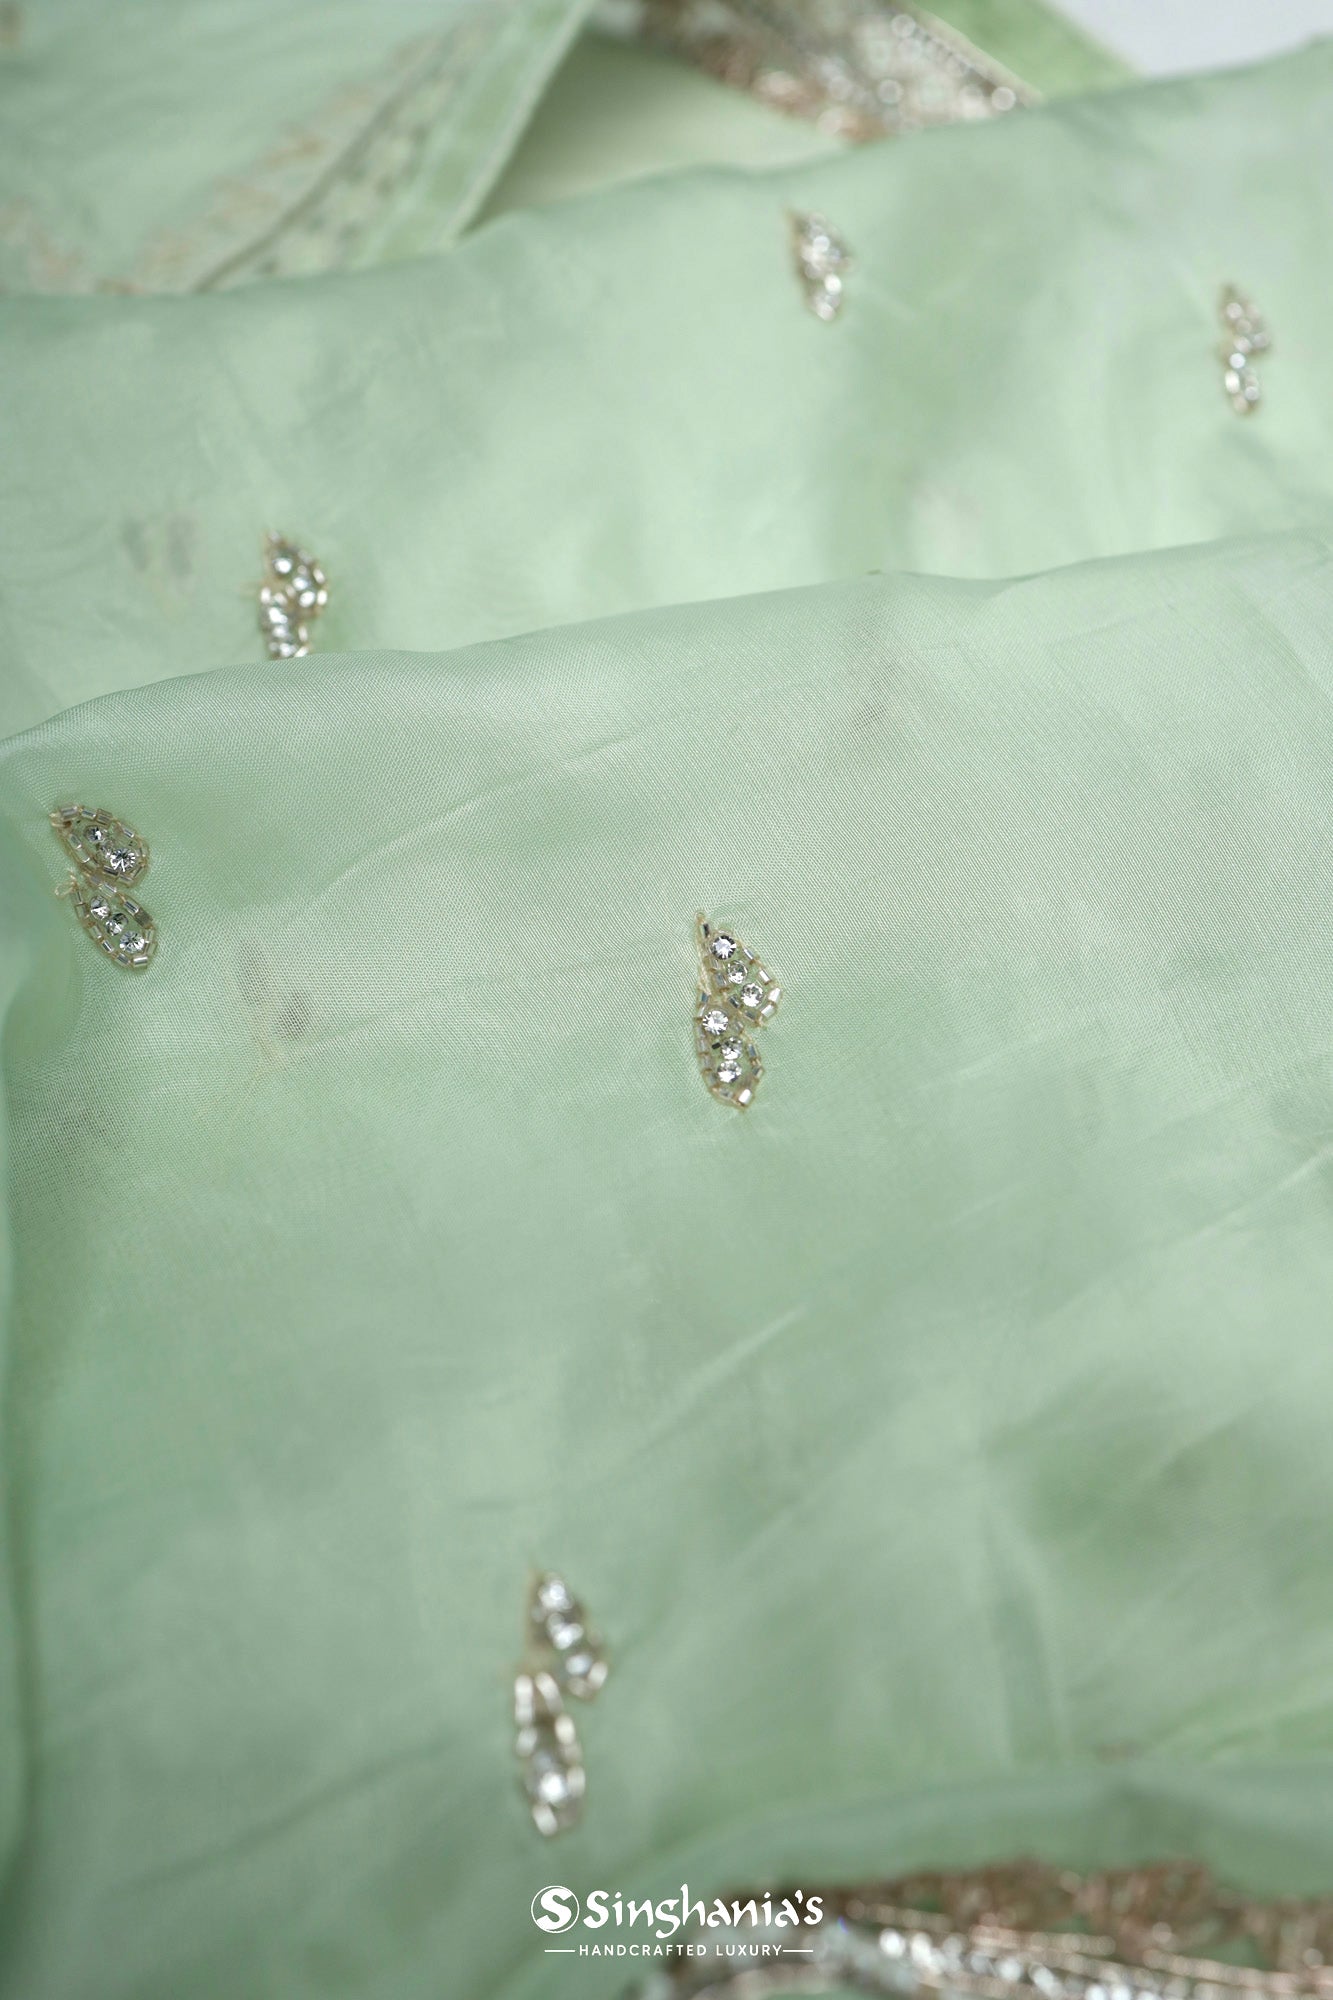 Chetwode Green Organza Saree With Butti Embroidery